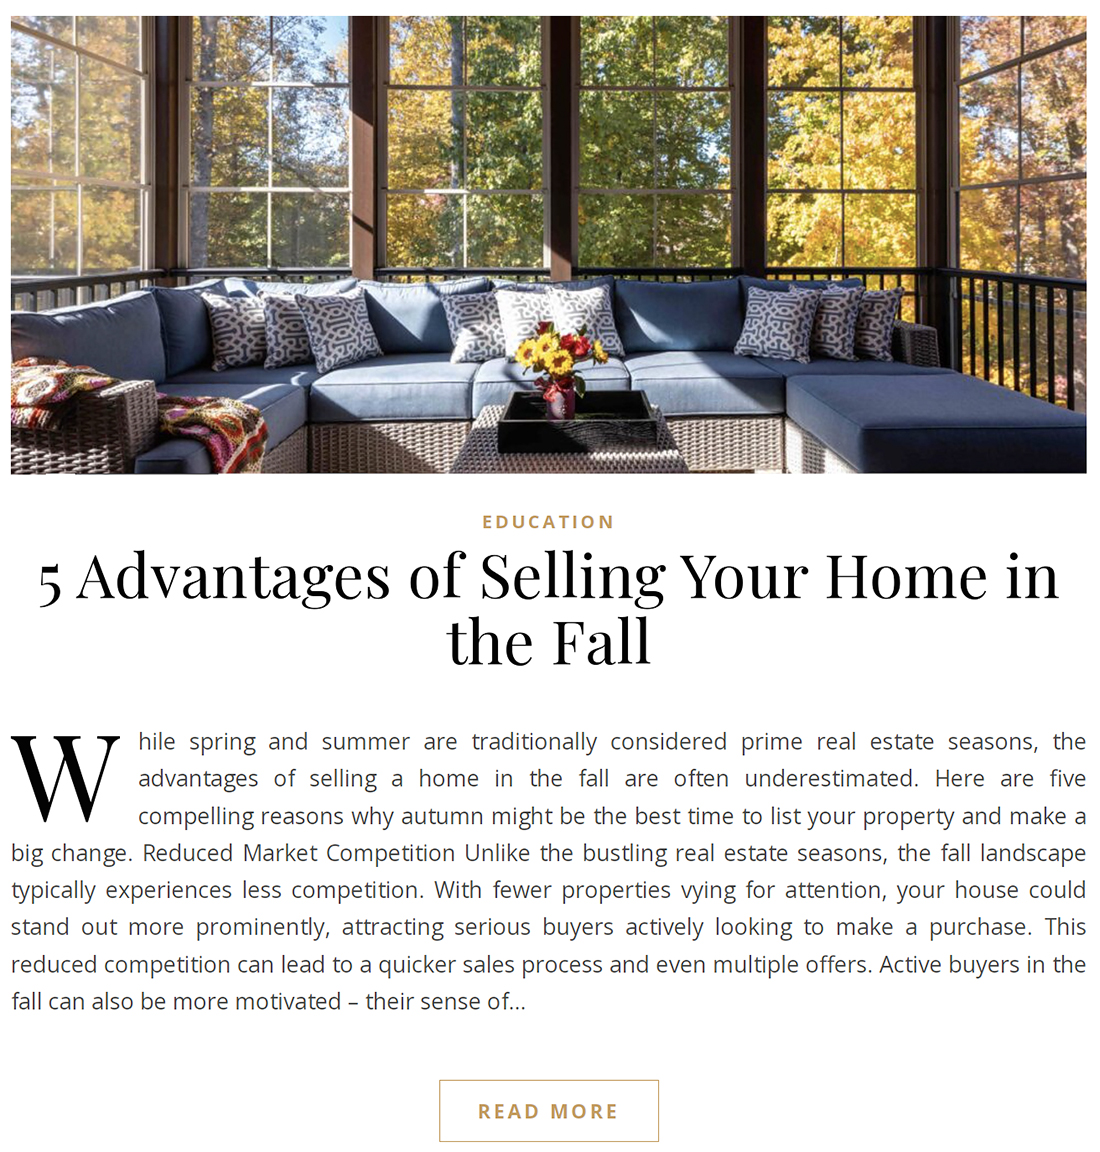 5 Advantages Selling in Fall